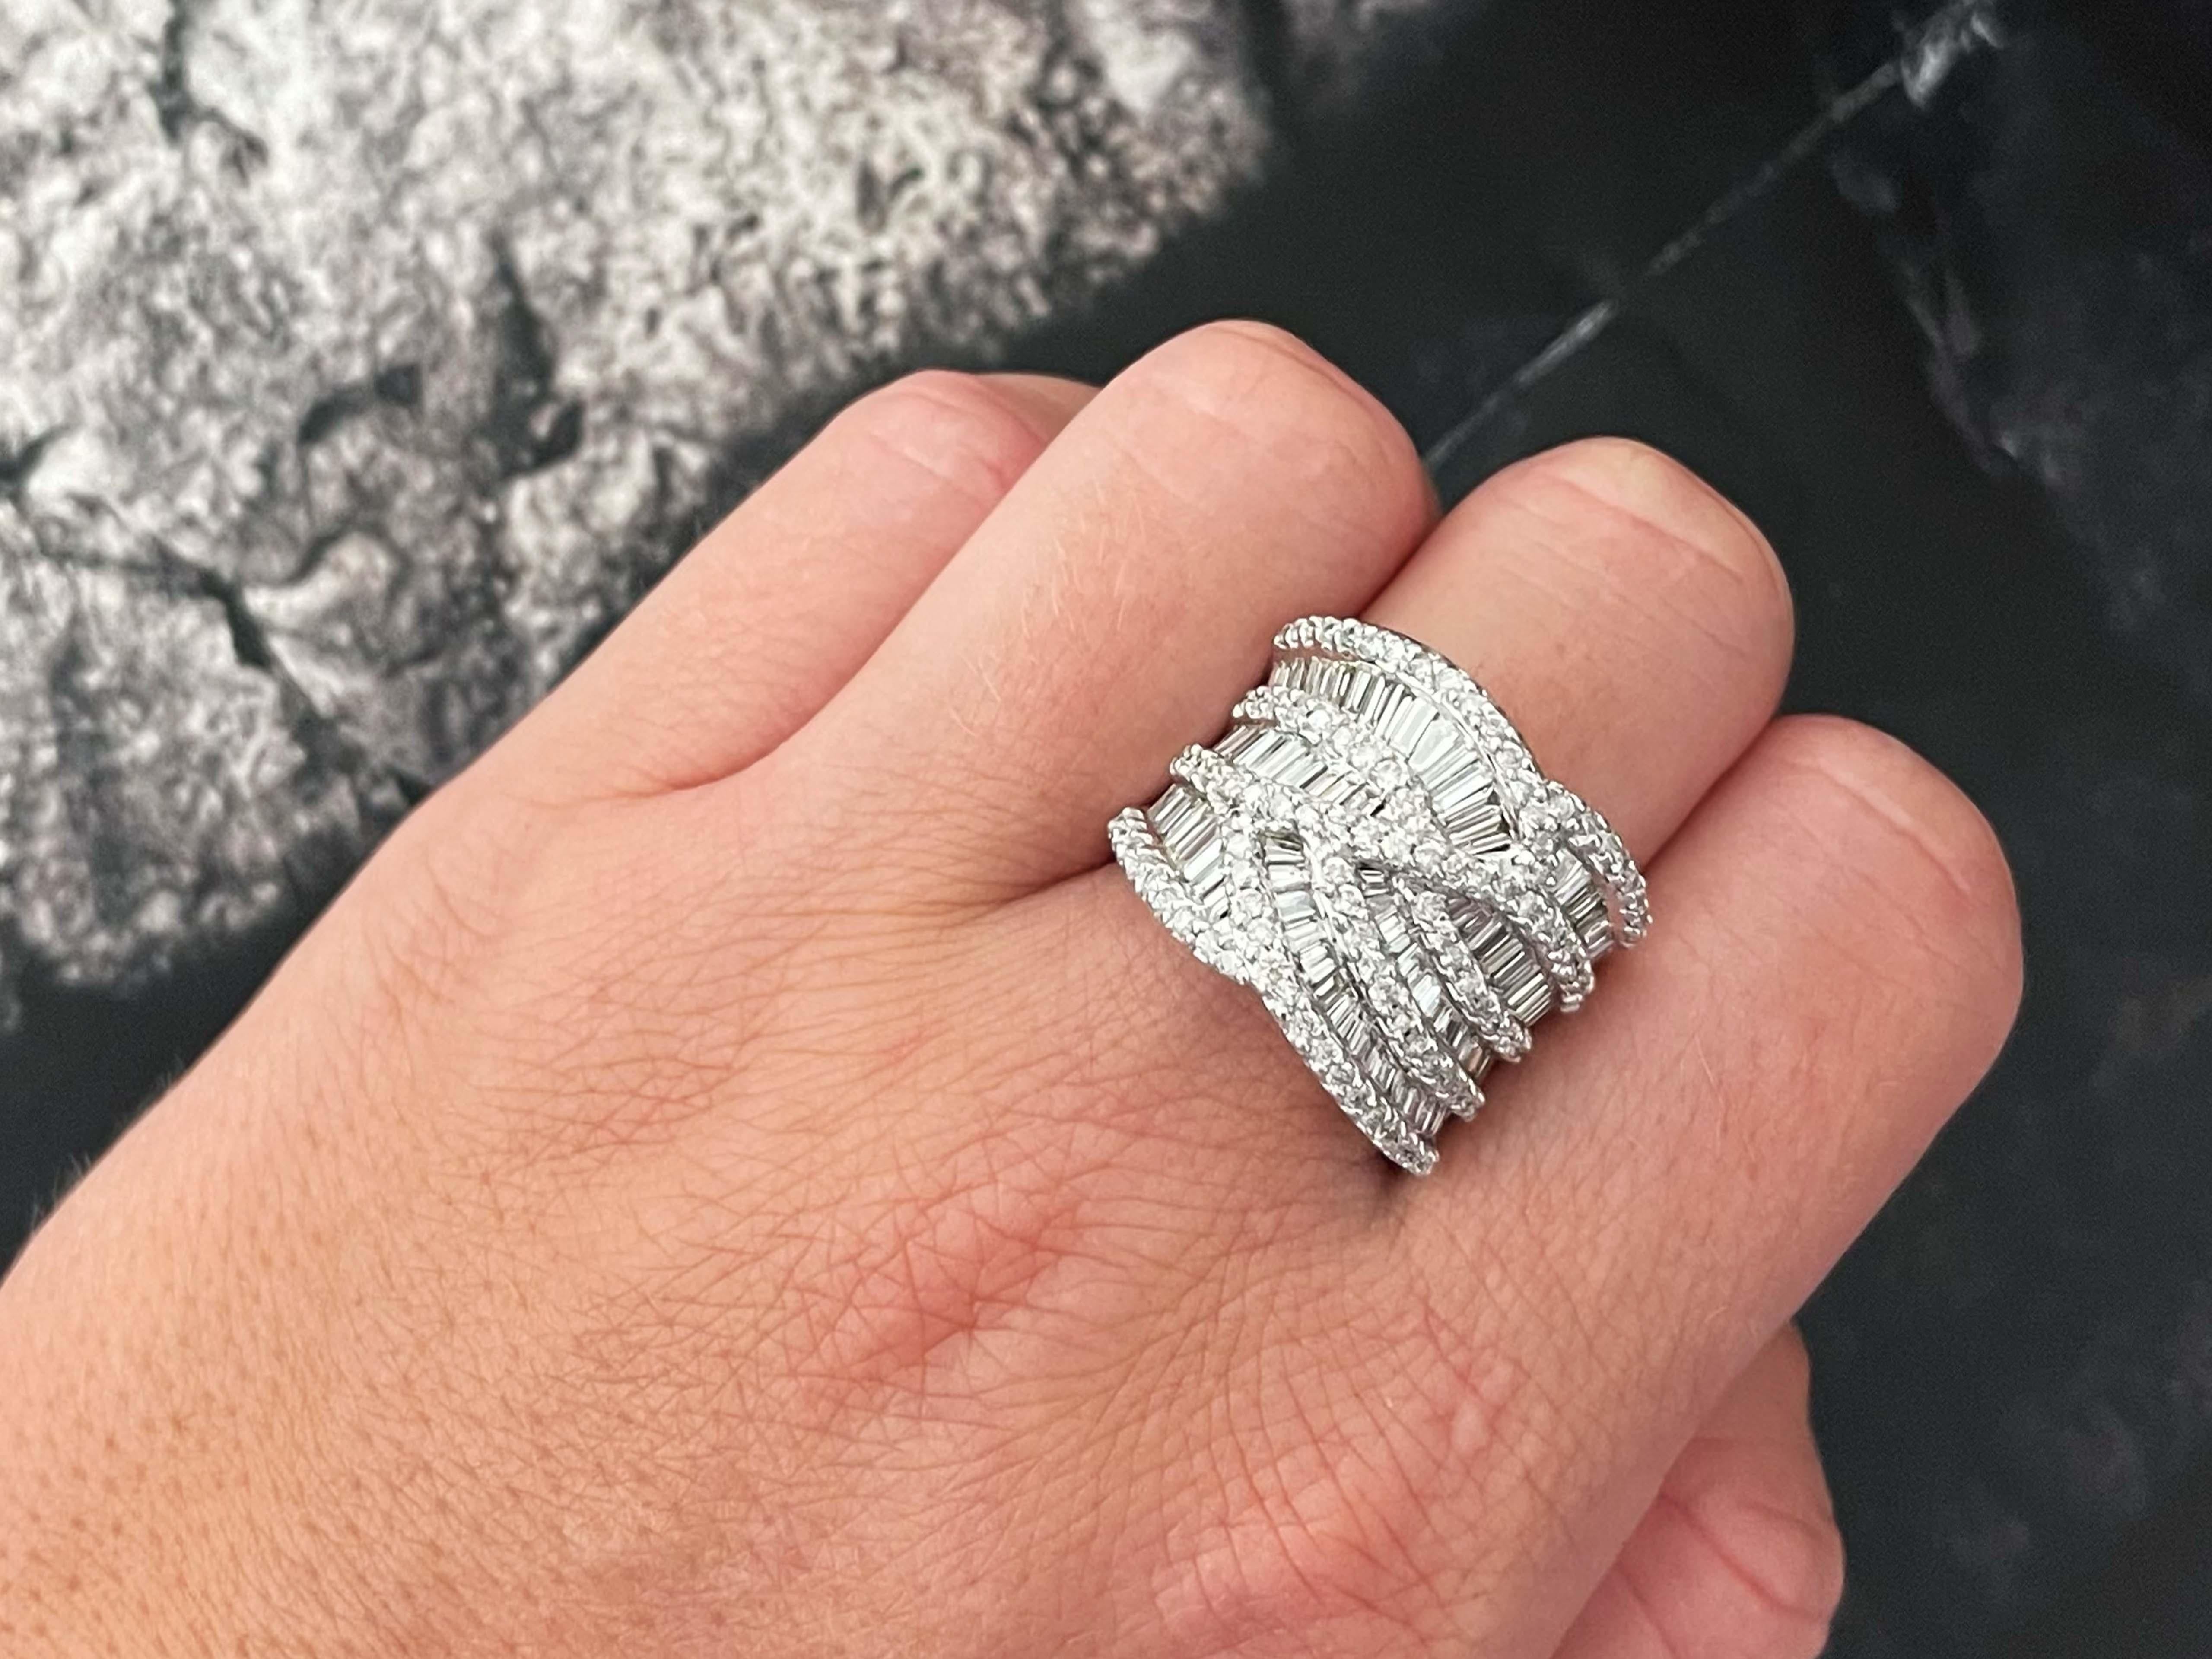 Item Specifications:

Metal: 18k White Gold

Diamond Count: 102 round brilliant diamonds & 92 baguette = 194 diamonds
​
Total Diamond Carat Weight: ~4 carats

Diamond Color: G

Diamond Clarity: VS

Ring Width: ~19 mm

Ring Size: 7 (resizable)

Total